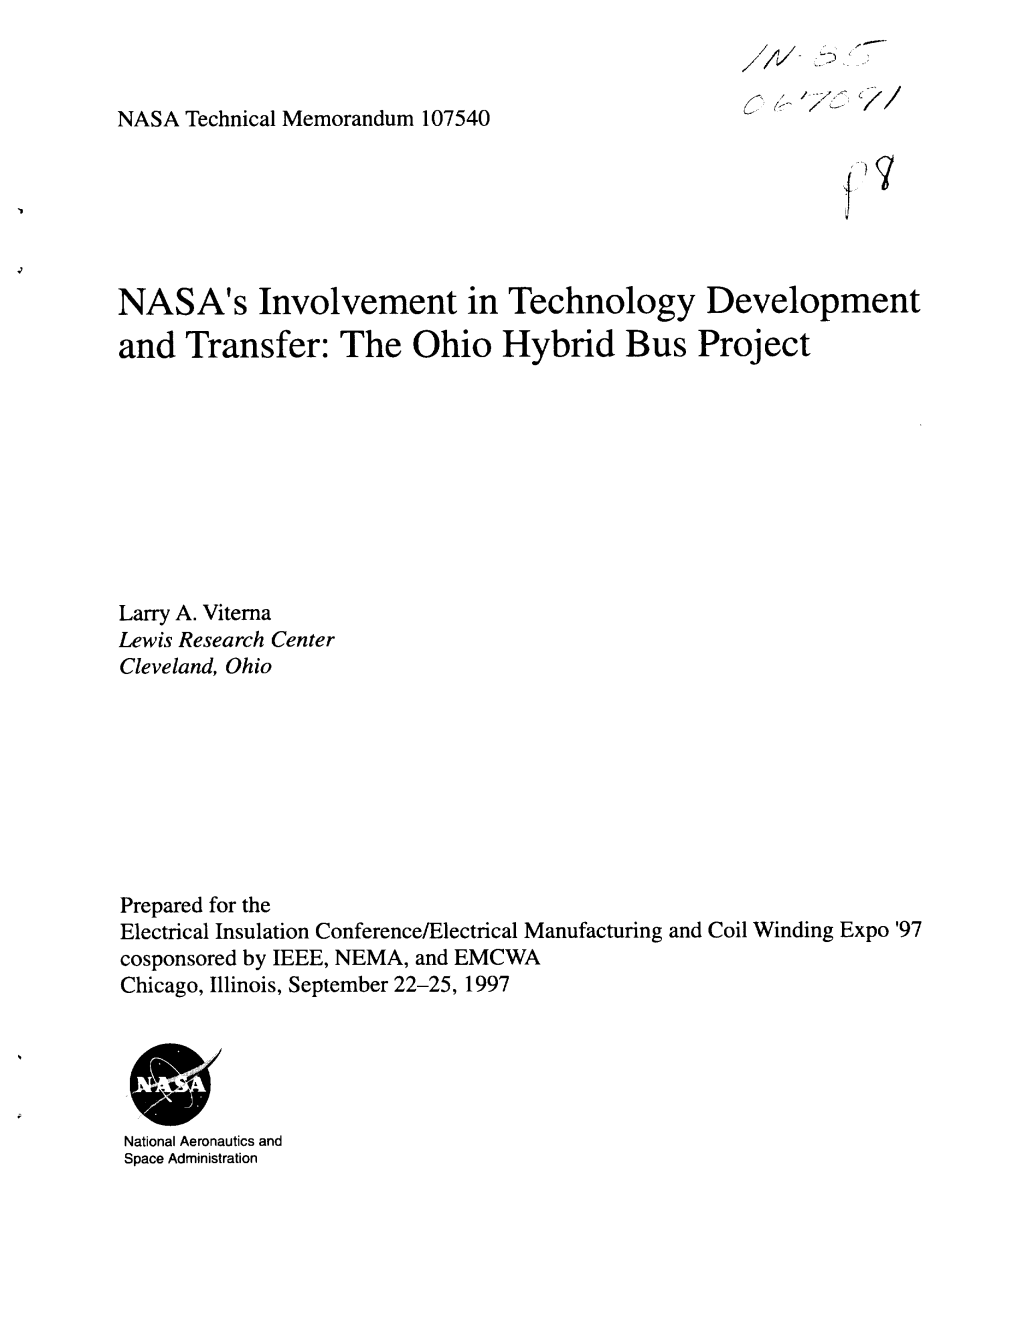 The Ohio Hybrid Bus Project